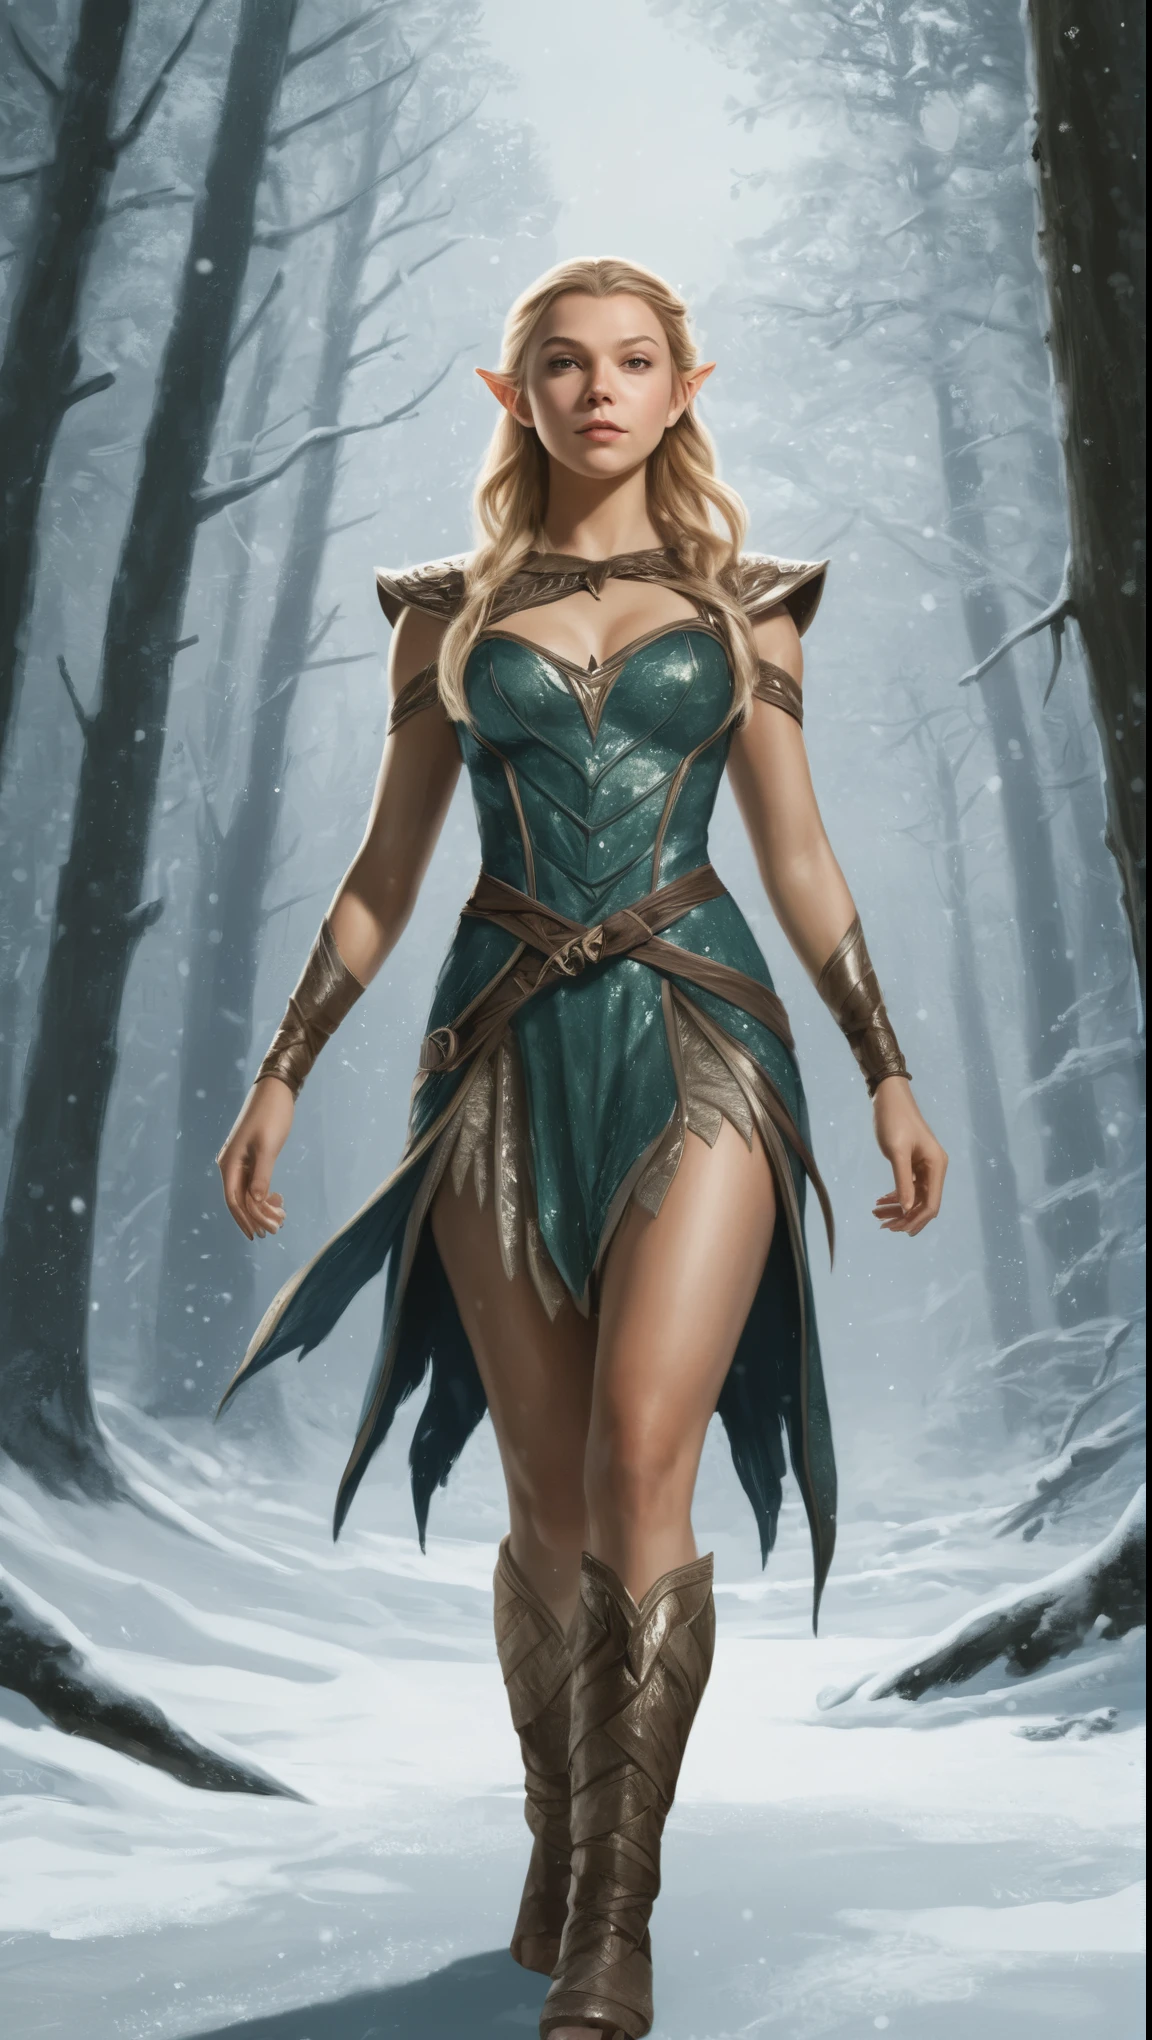 An illustrated movie poster, hand-drawn, full color, a teenage elven girl, wearing a sequin loincloth, resembles Natalie Dormer, sun-tanned complexion, very tall, athletic body, hourglass figure, curvy, toned midriff, bottom-heavy, generous hips, massive bubble-butt, long legs, ridiculously thick powerful thighs, long pointy elf ears, blonde hair, long loose waves, posing in a snowy boreal forest, hard shadows, graphite shading, stencil marks, airbrushed acrylic paint, masterpiece, in the style of Skyrim 